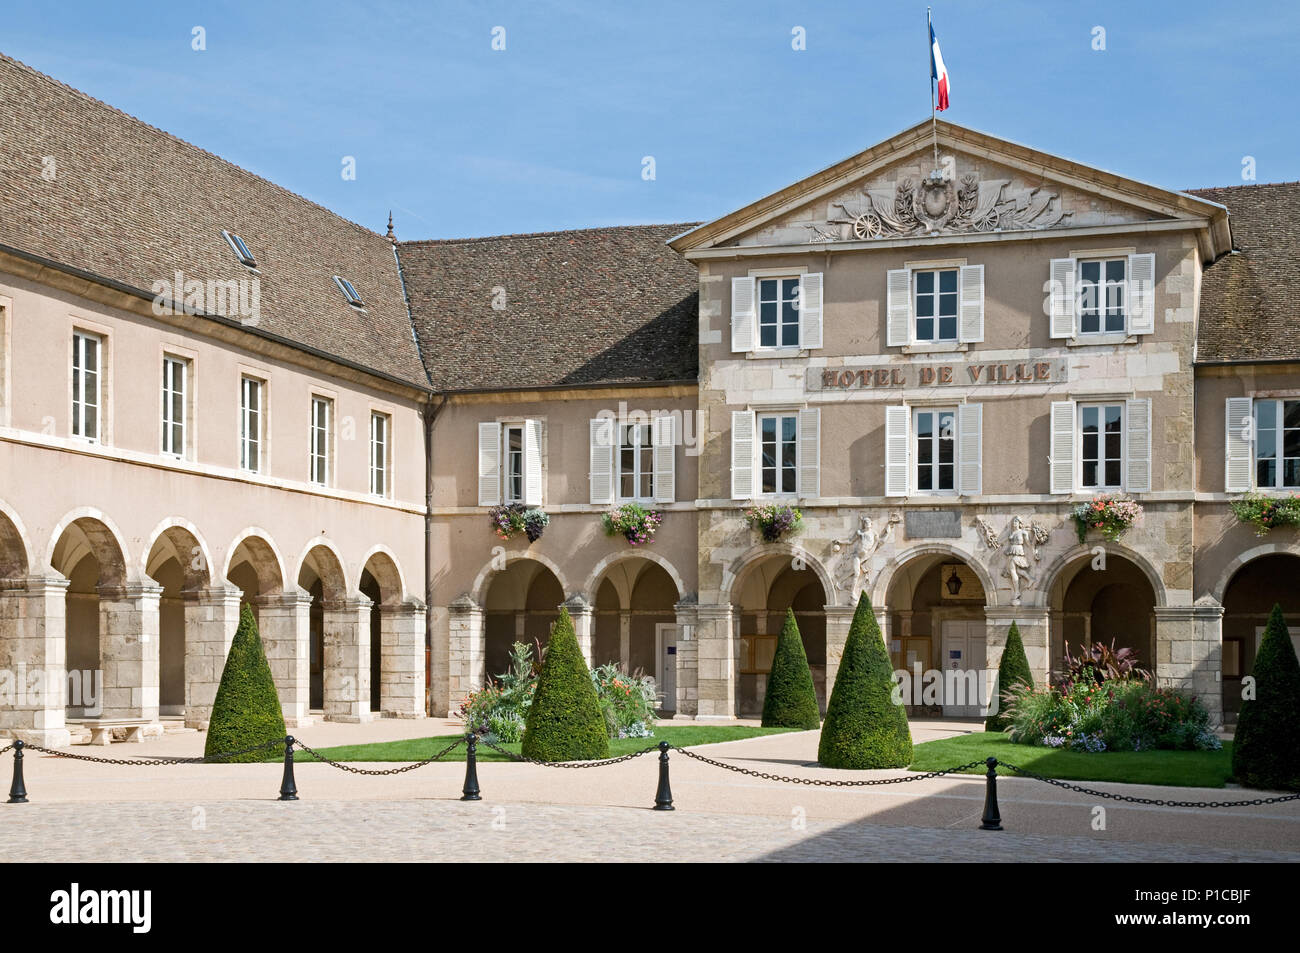 Hotel de Ville or Council Buildings in Beaune Burgundy France Stock Photo